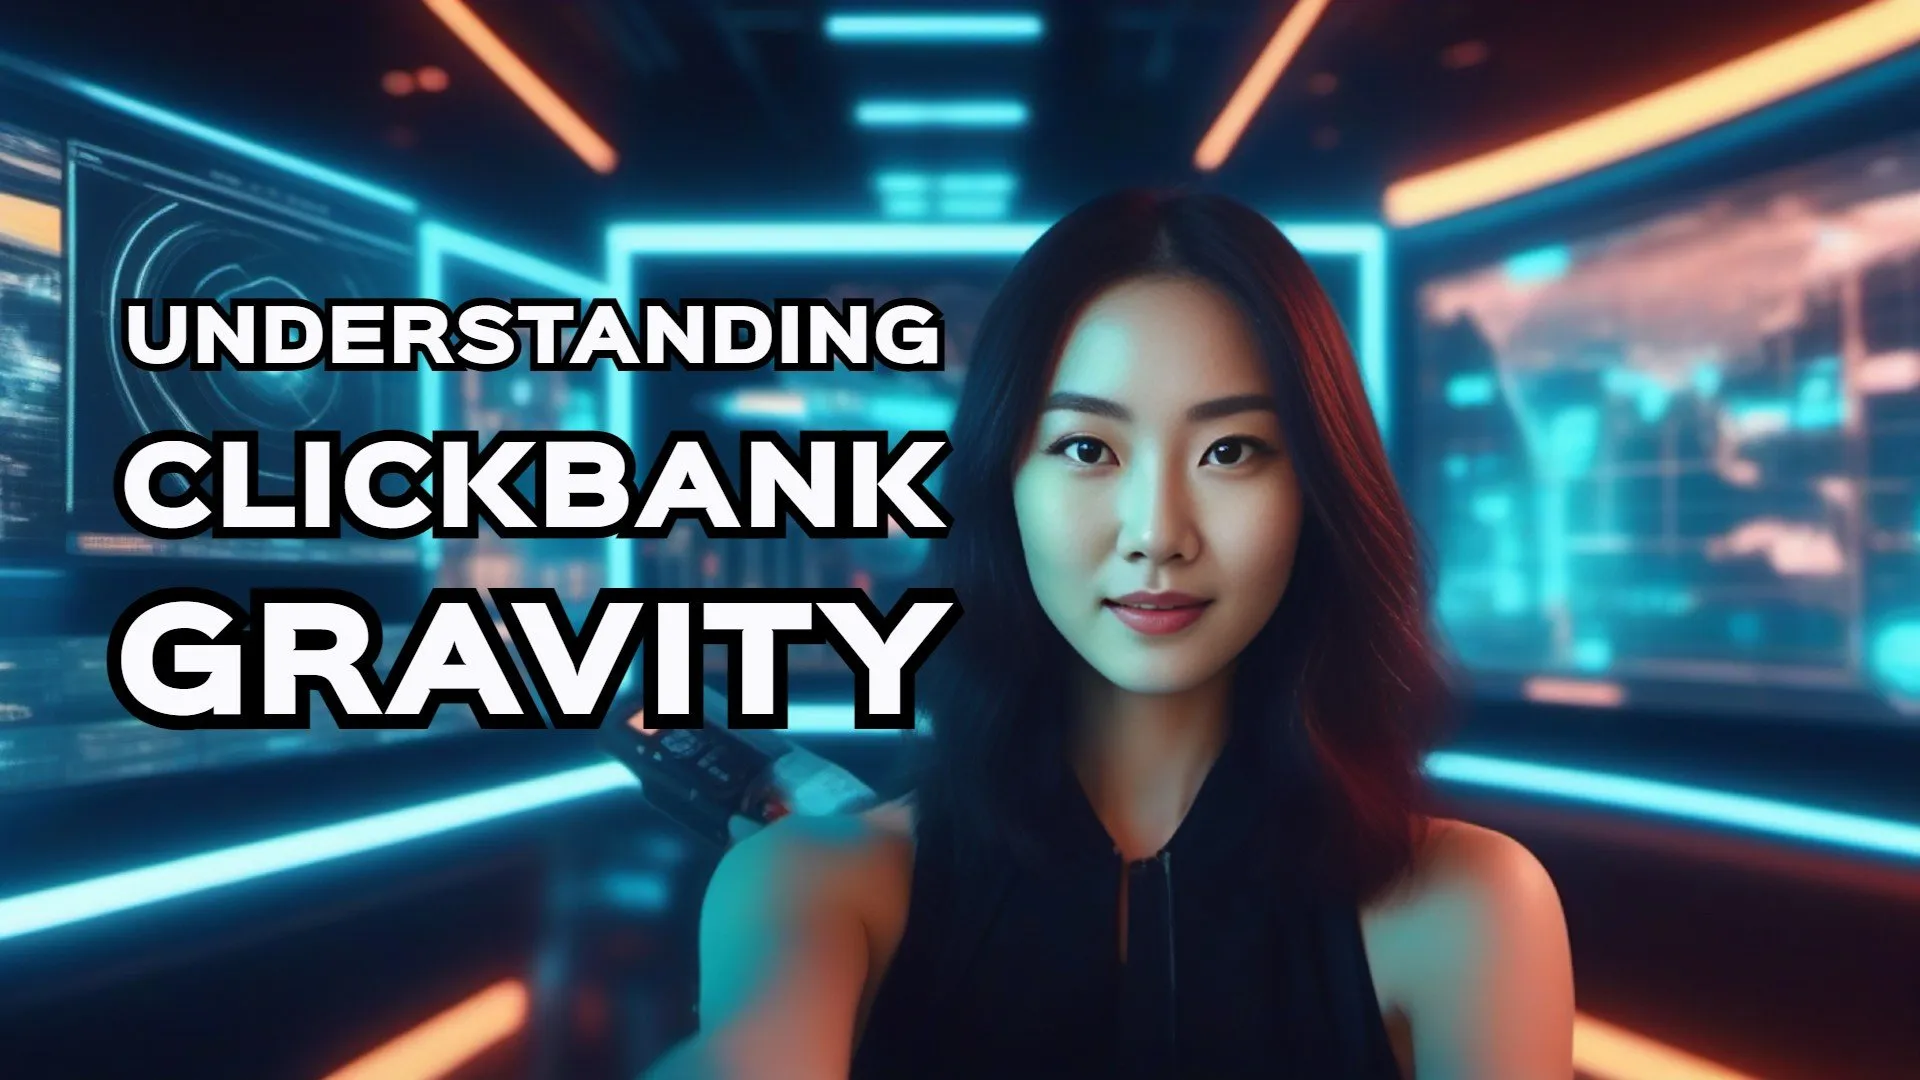 What is a Clickbank Gravity Score?